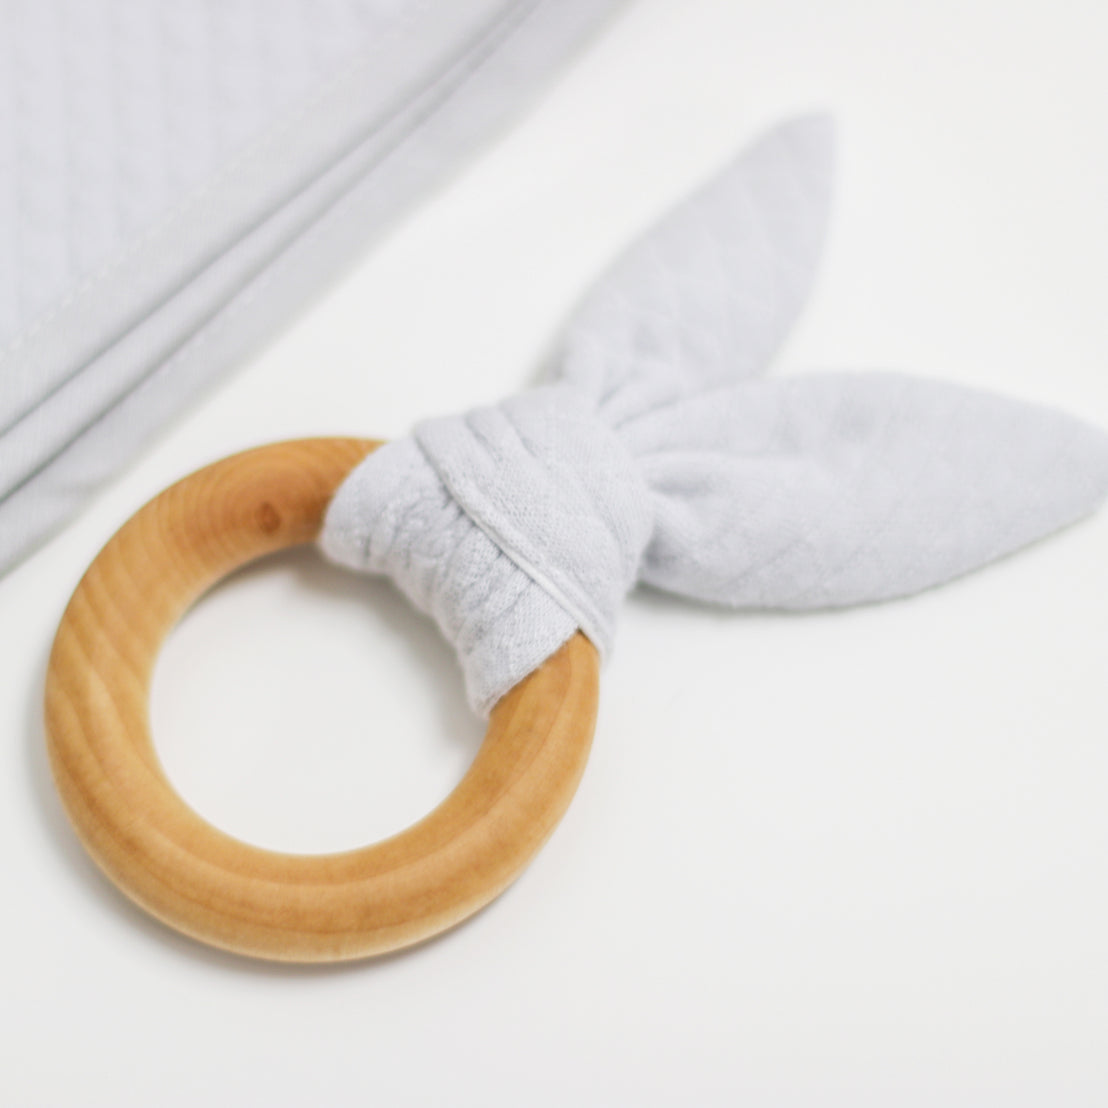 Close up photo of the Grayson wooden teether ring against a white backdrop.